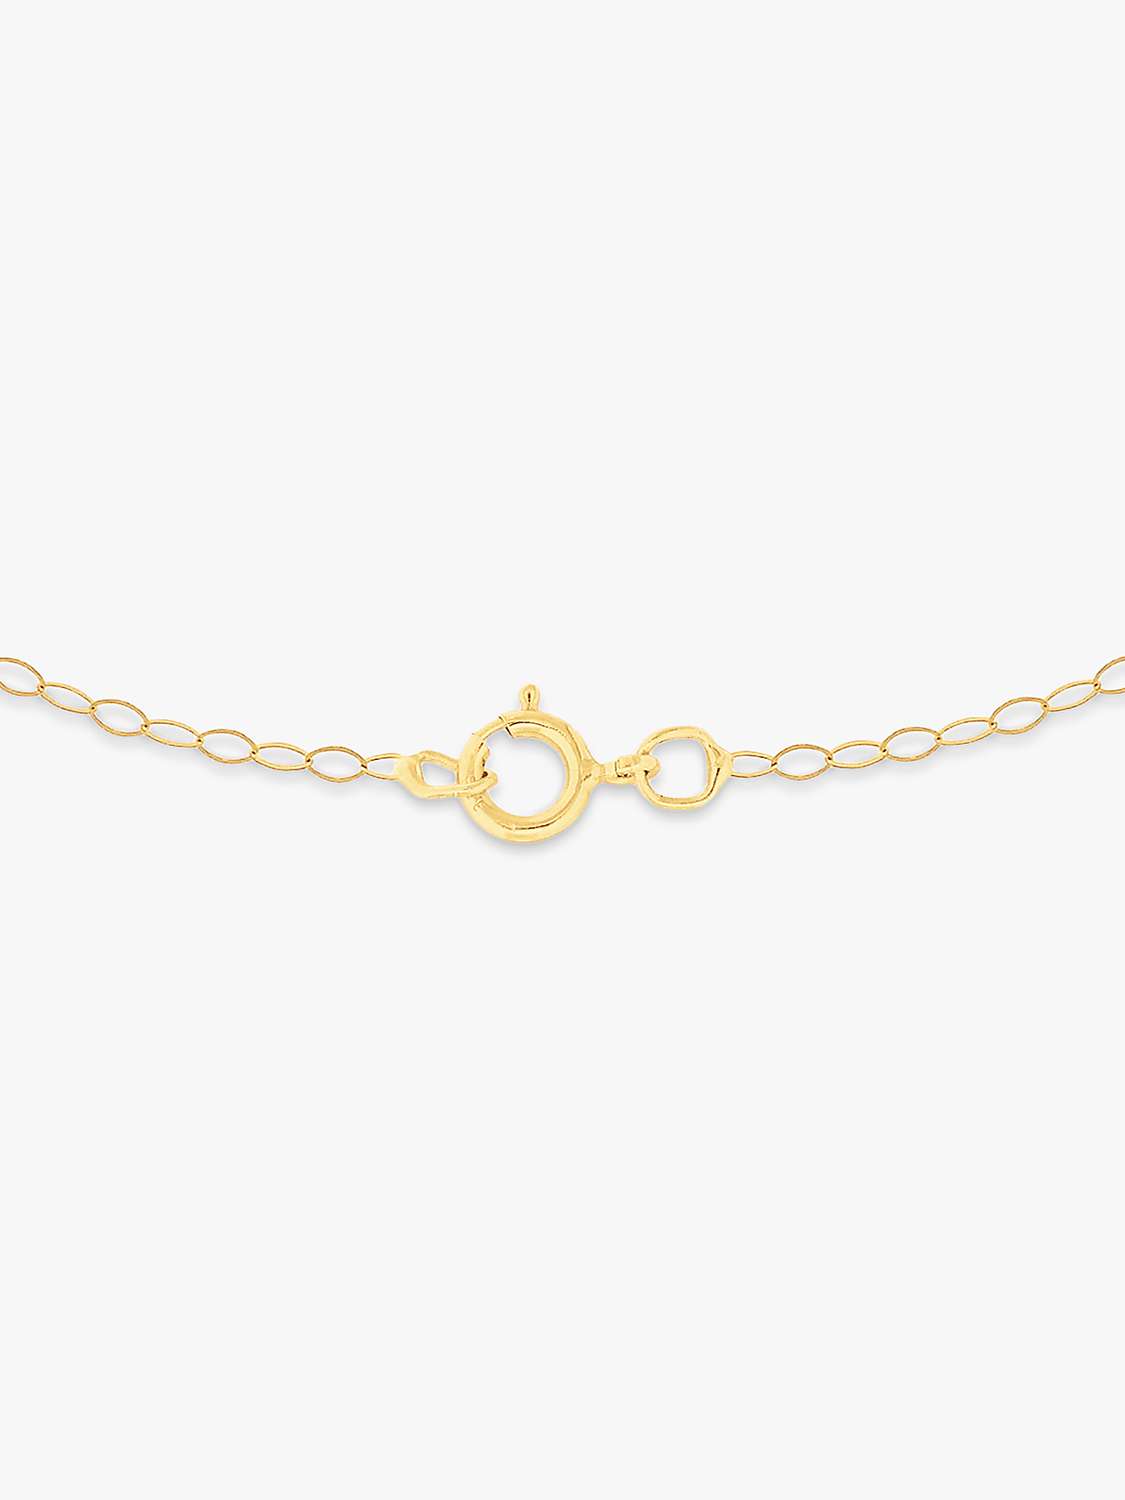 Buy IBB 9ct Yellow Gold Long Loose Link Chain Necklace, Gold Online at johnlewis.com